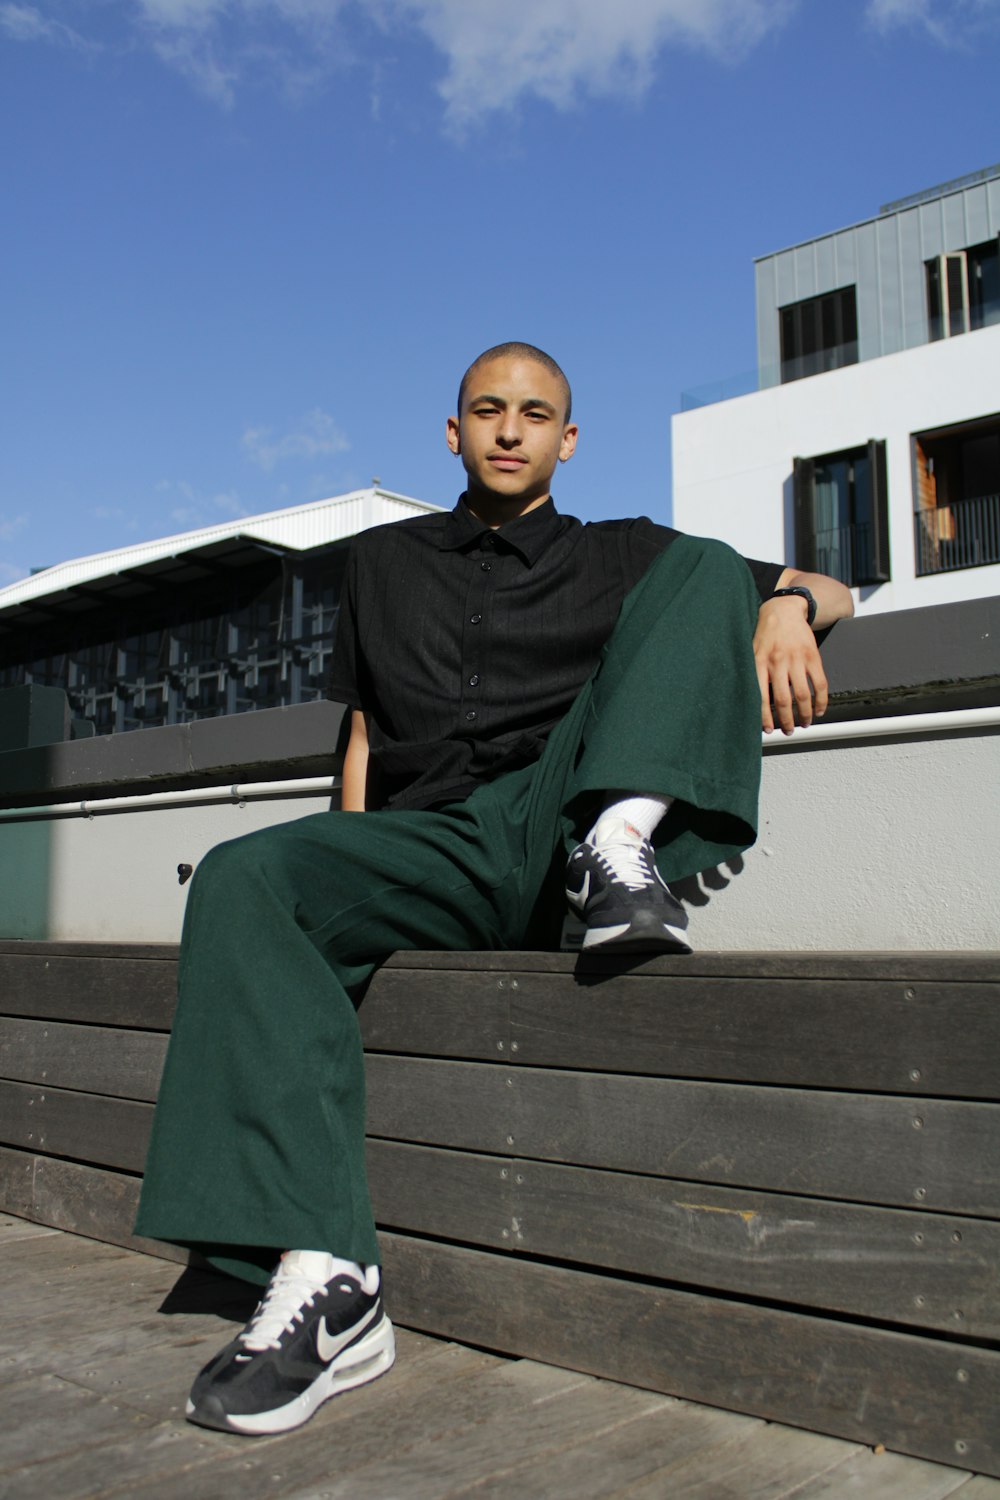 a man sitting on a wooden bench wearing a black shirt and green pants